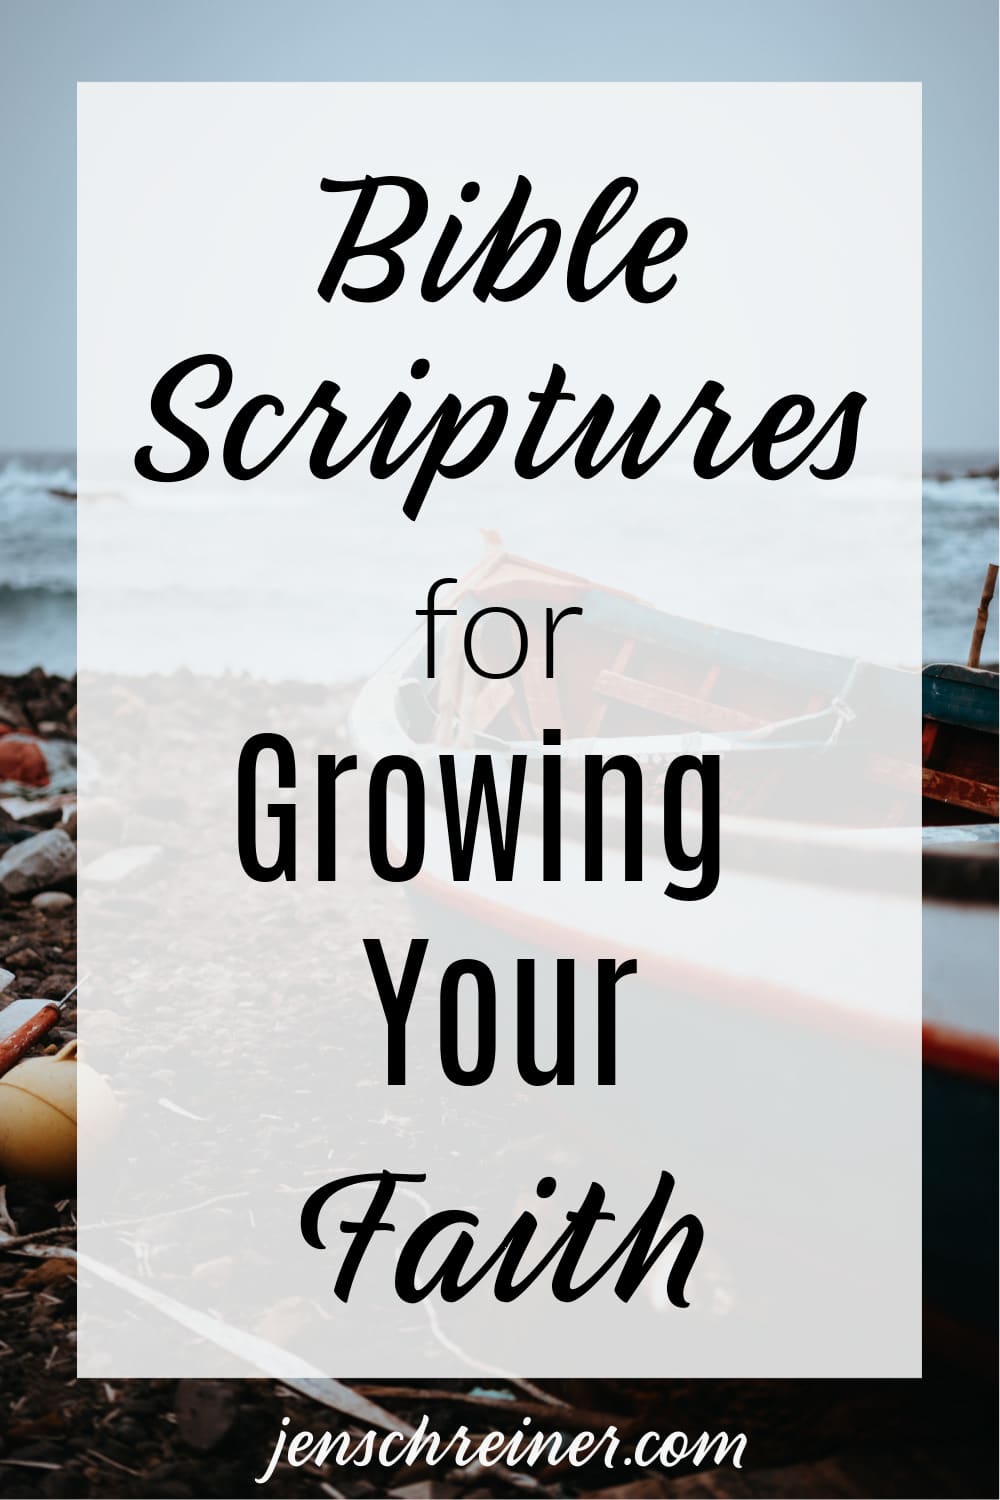 Looking for bible scripture that will help you grow your faith? These verses will help you strengthen your relationship with Jesus Christ